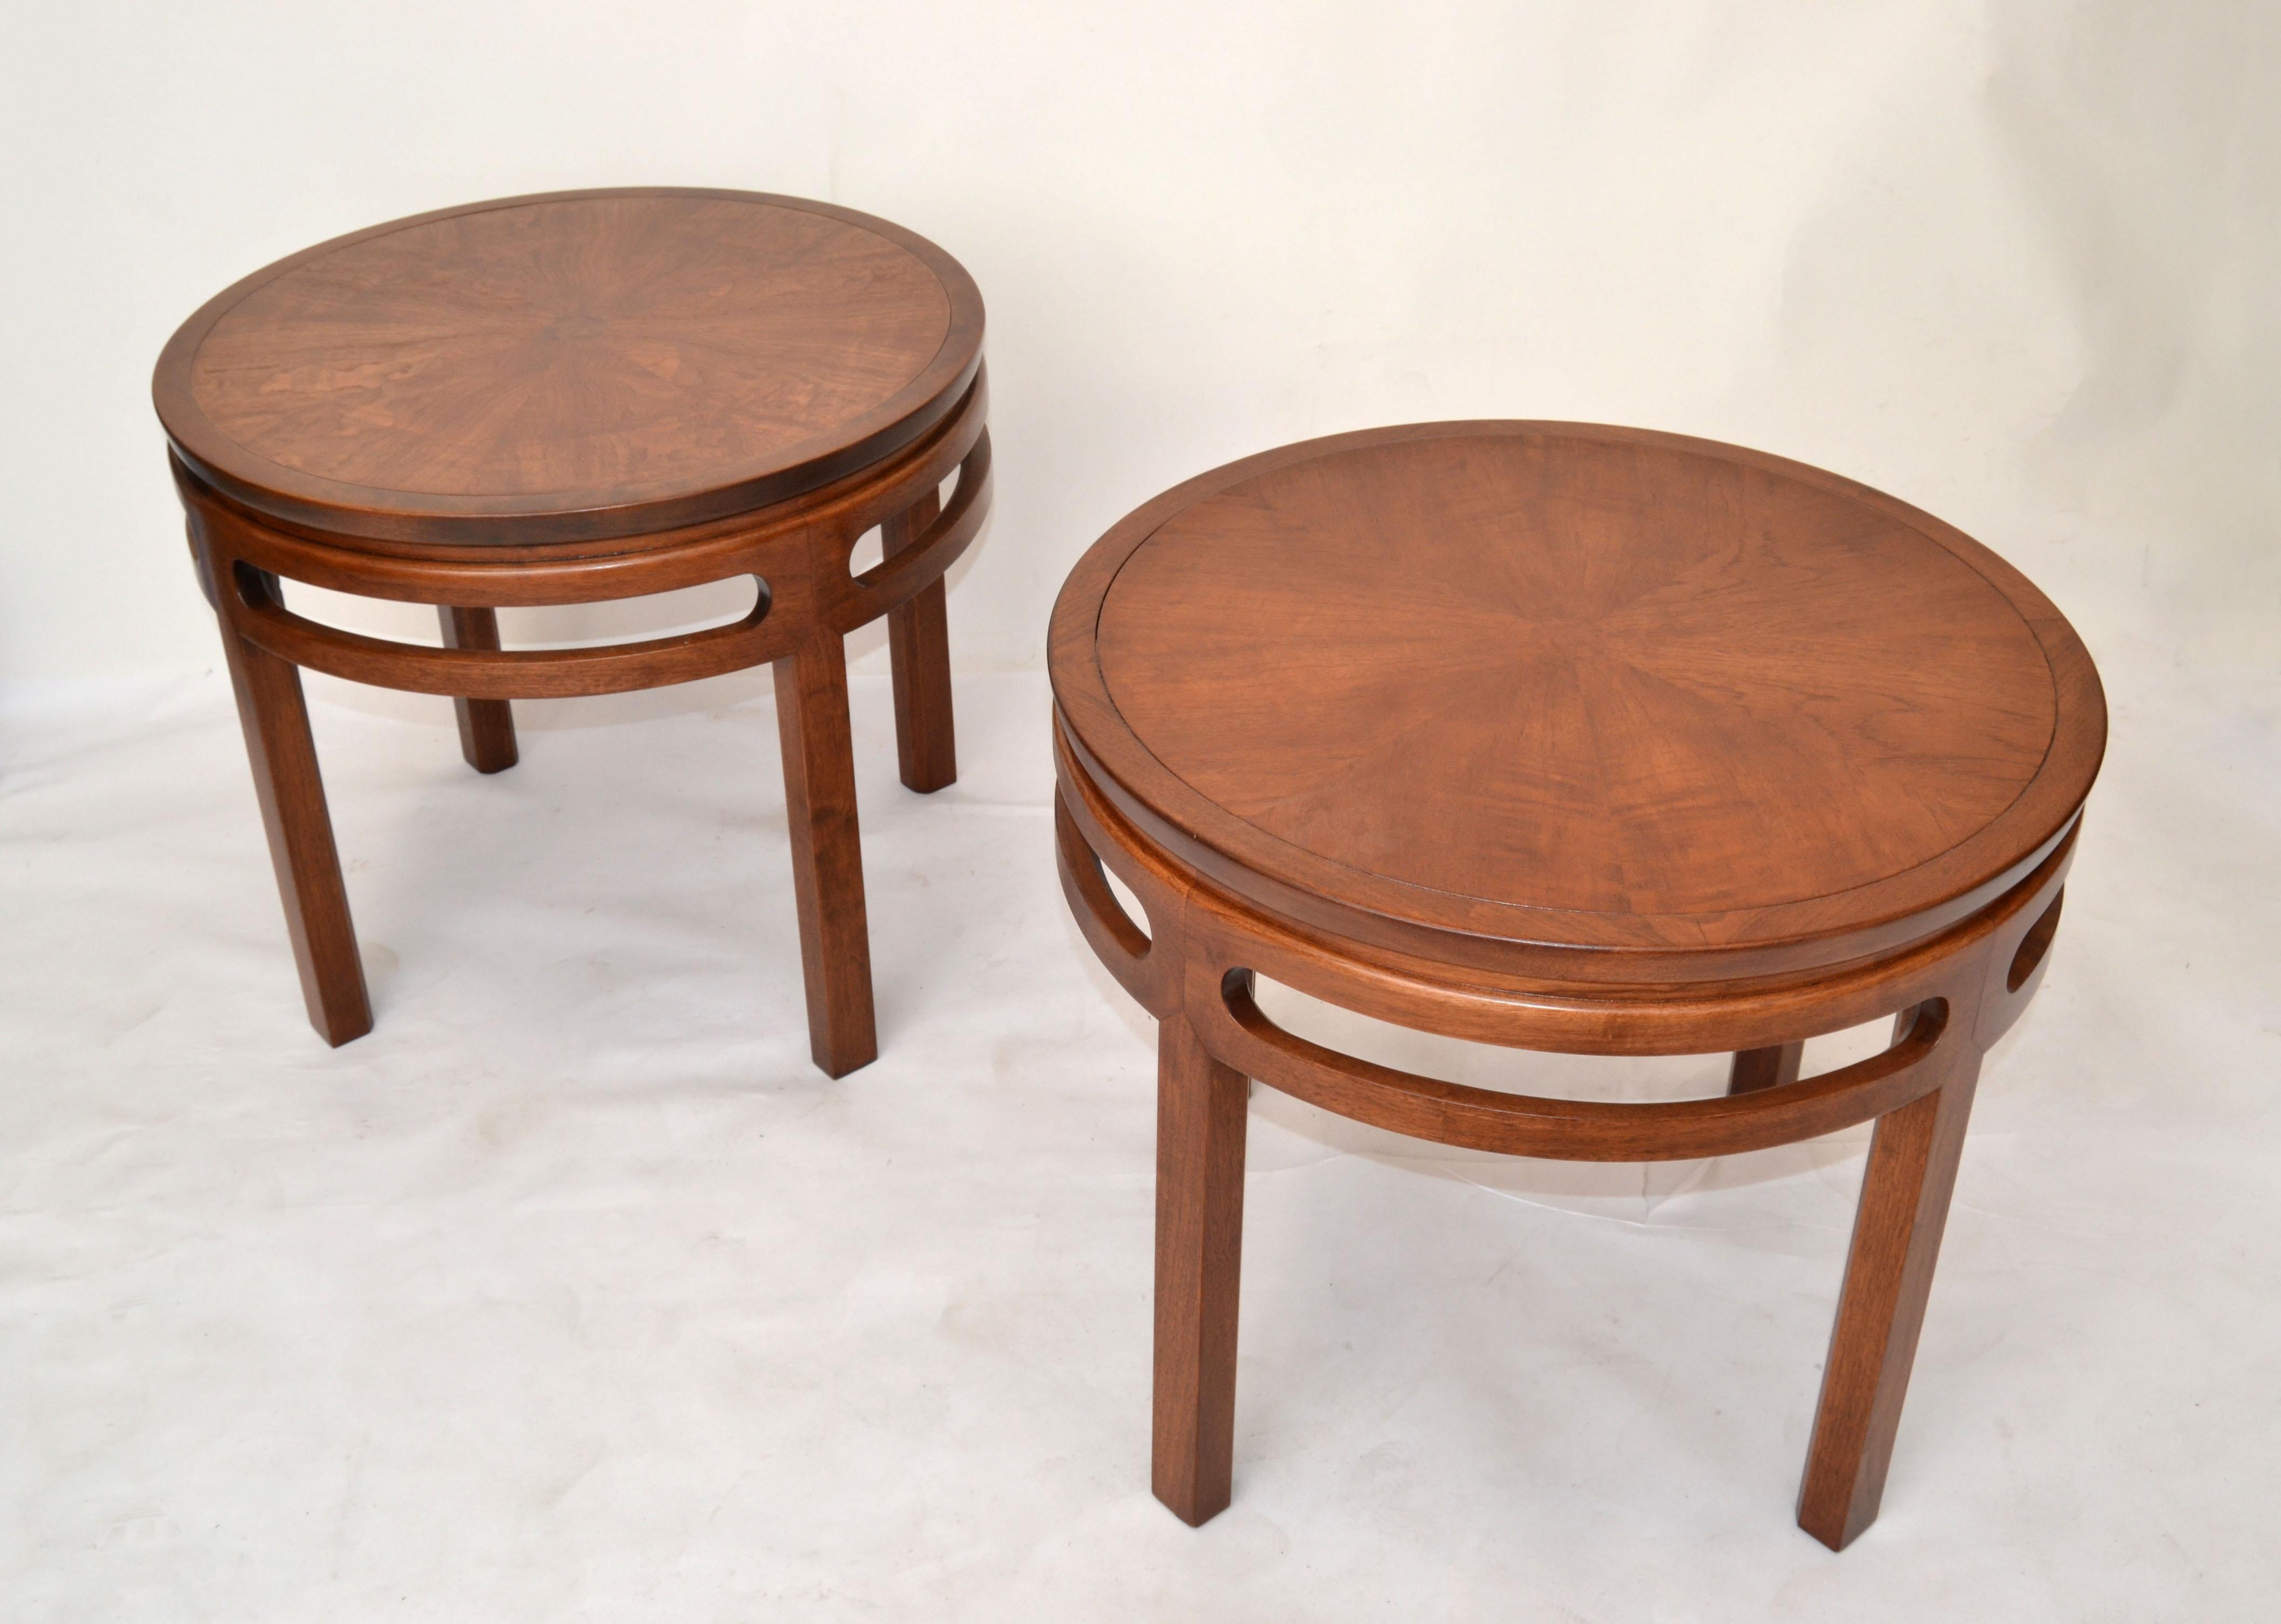 Pair of Asian Modern round Baker Far East Collection walnut coffee tables. 
Fully restored and ready for use.
One table is without foot glides and the height is 0.25 inches lower.
      